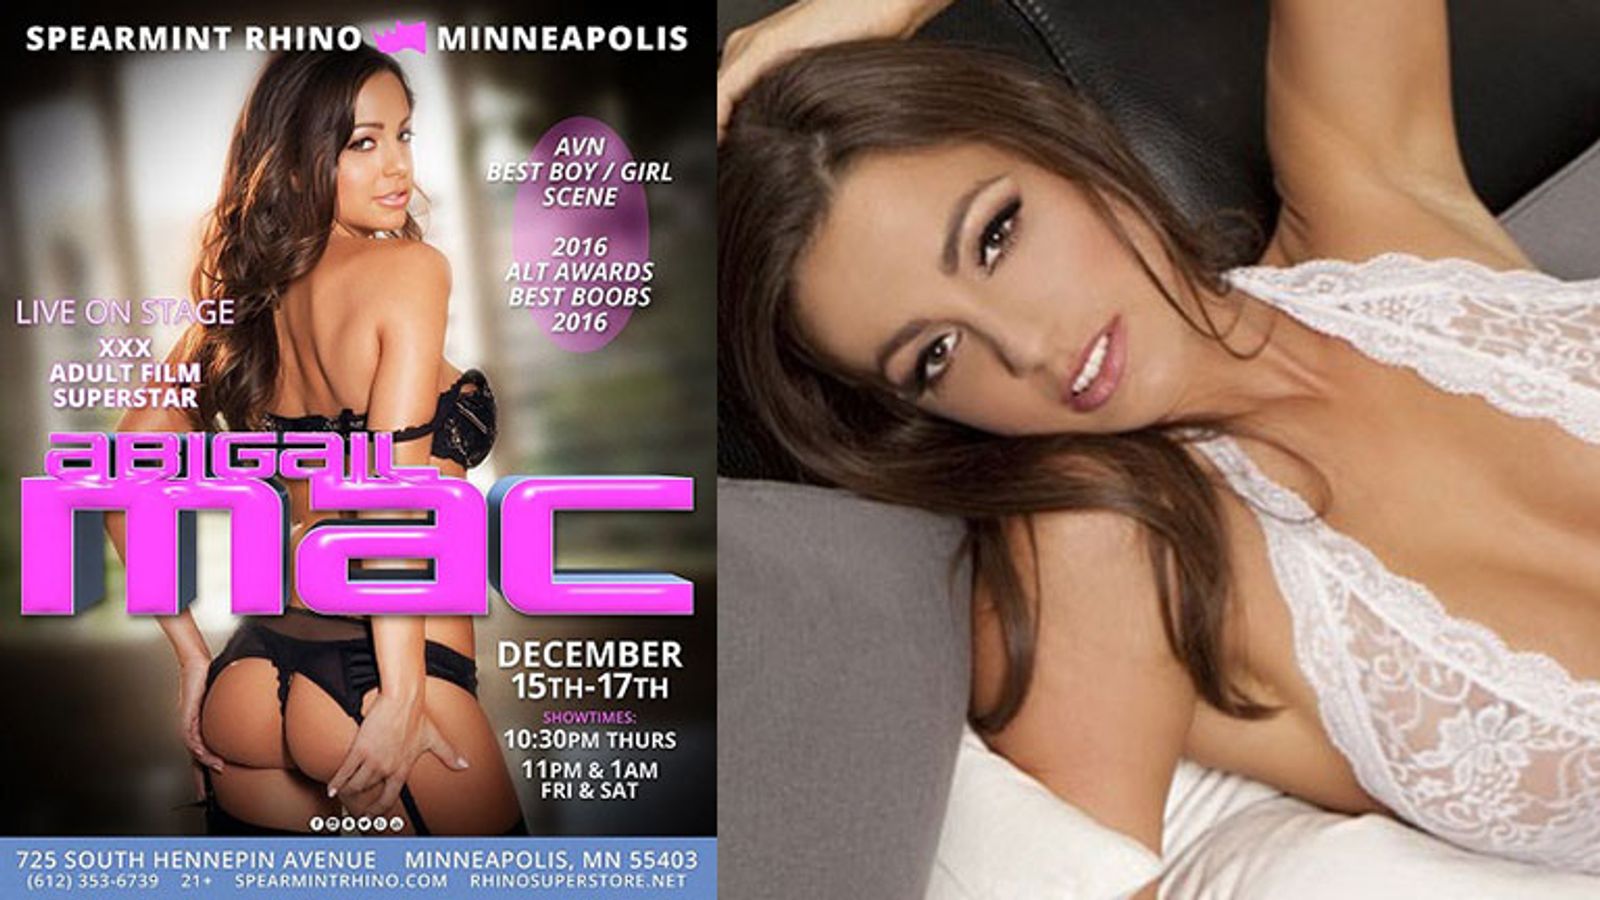 Abigail Mac Will Spend The Weekend Featuring In The Twin Cities